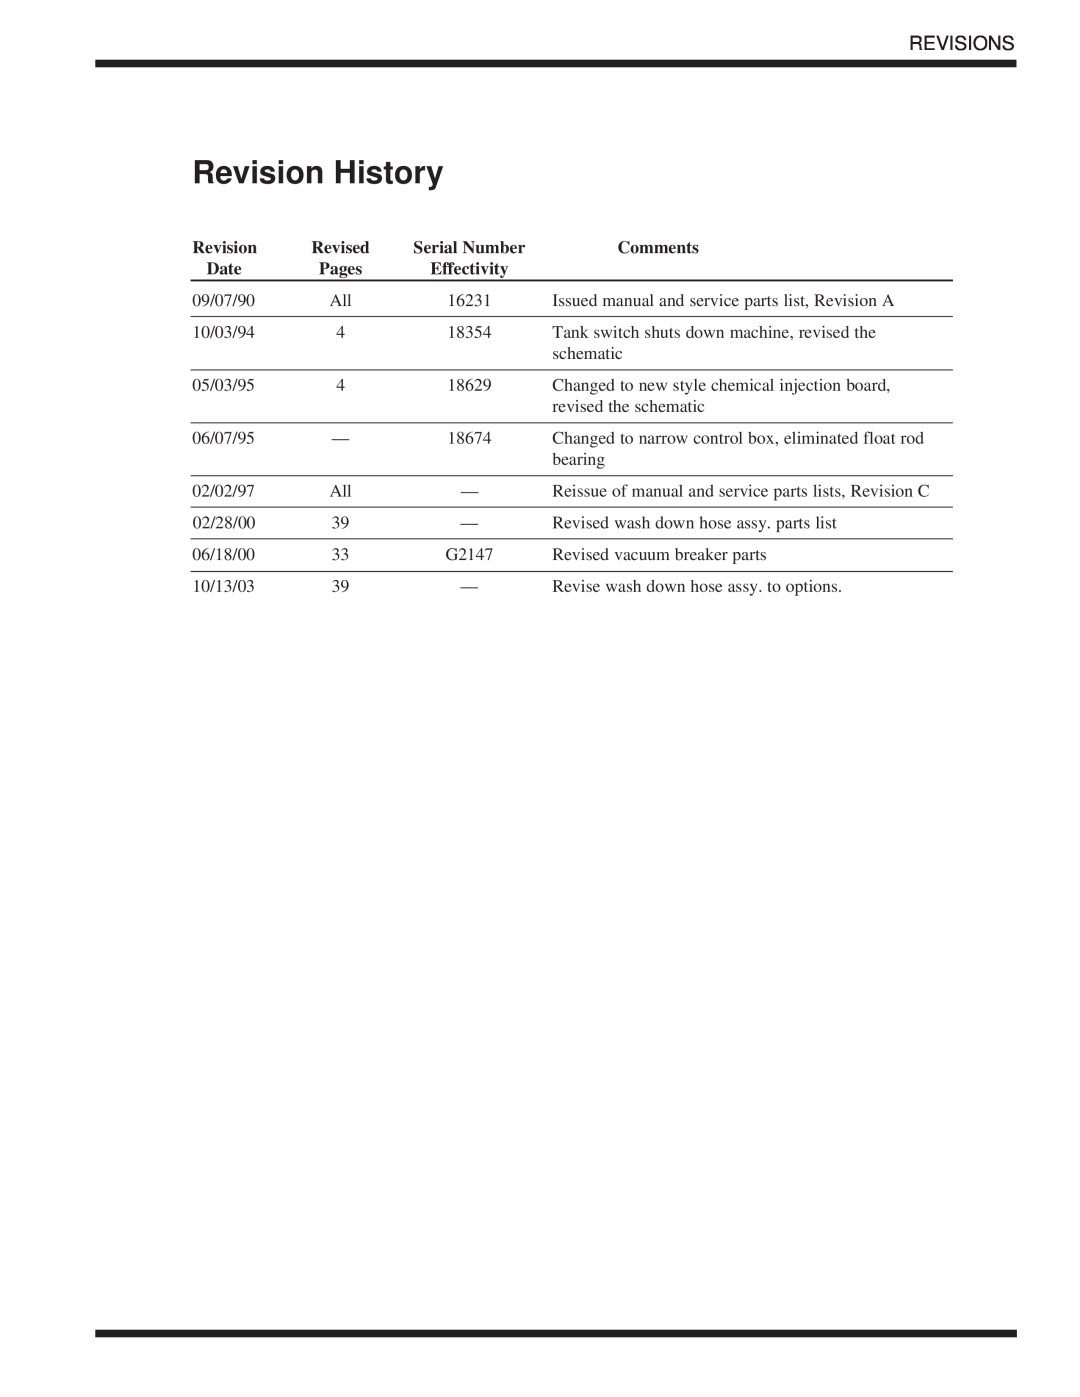 Moyer Diebel DF-M6, DF1-M6, DF2-M6 Revision History, Revisions, Revised, Serial Number, Comments, Date, Pages, Effectivity 